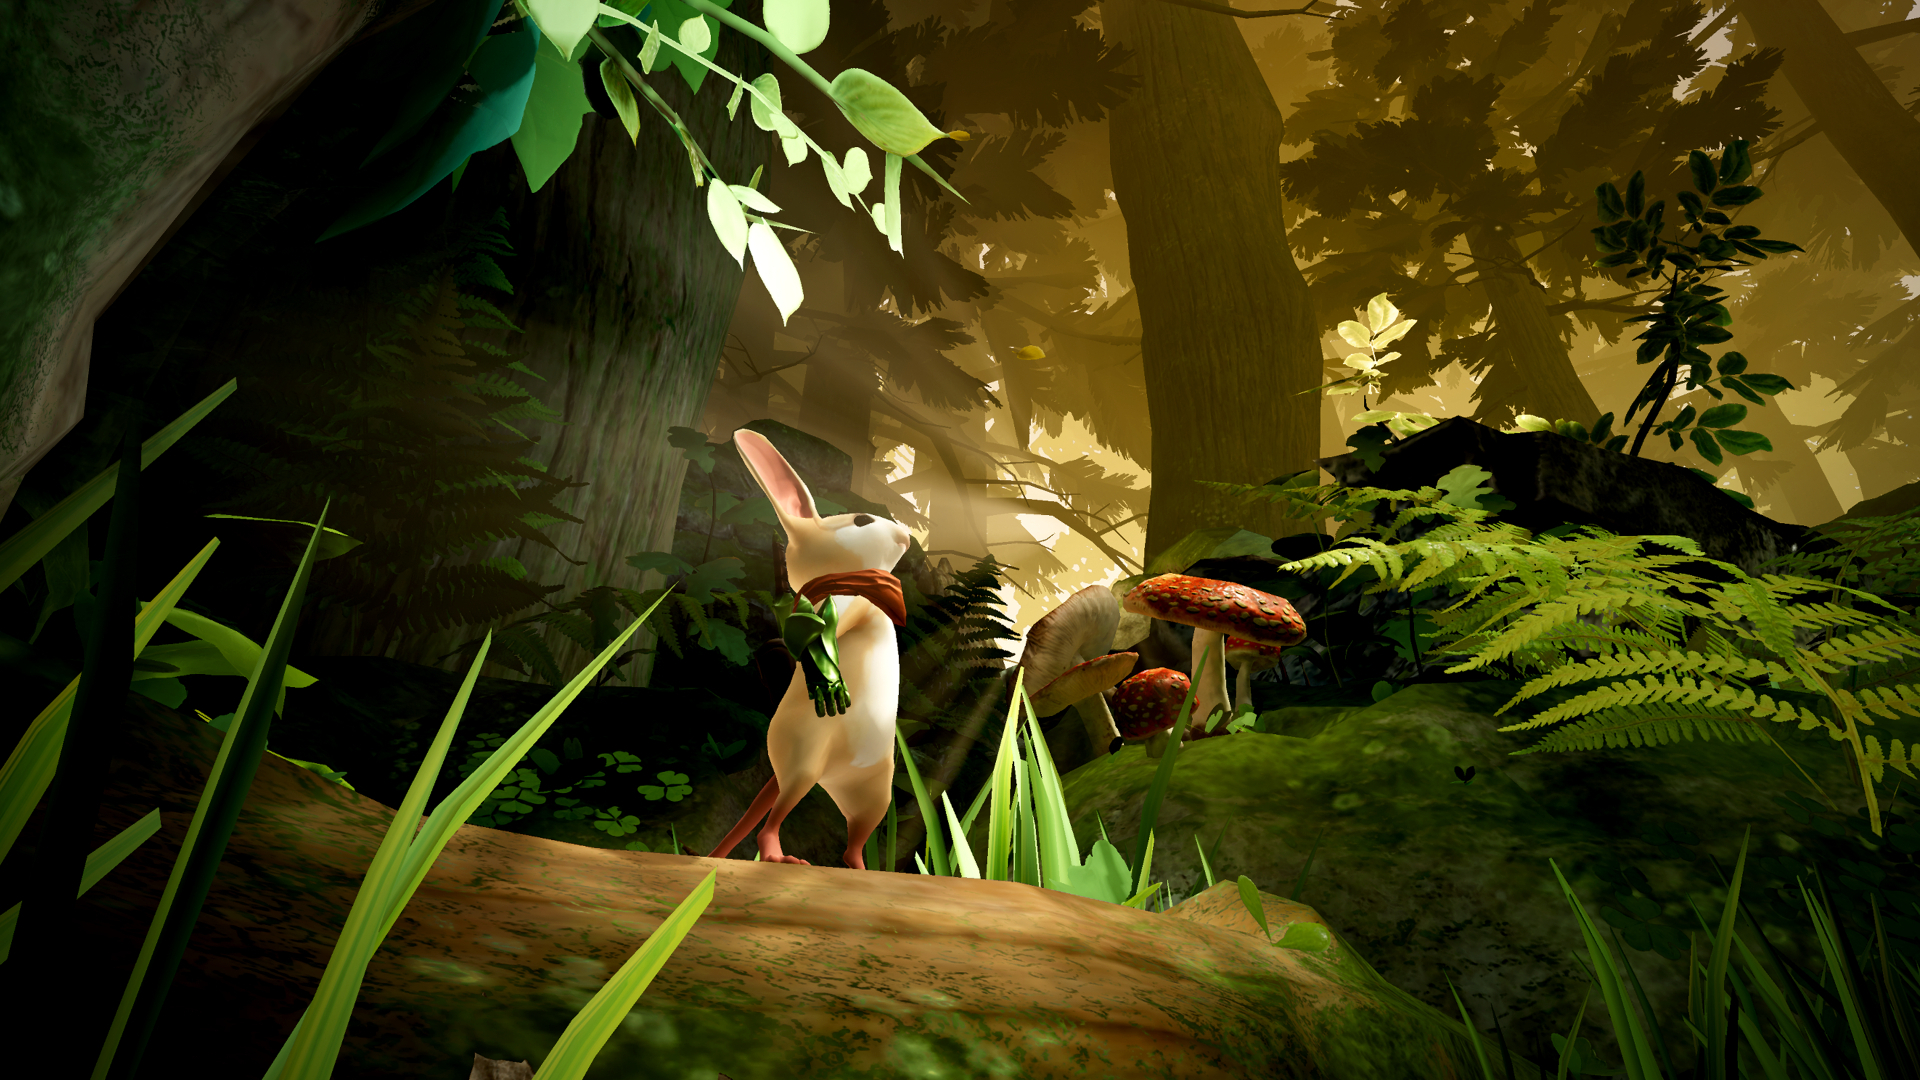 Best PS VR games: A mouse stands on a log looking up at the forest above